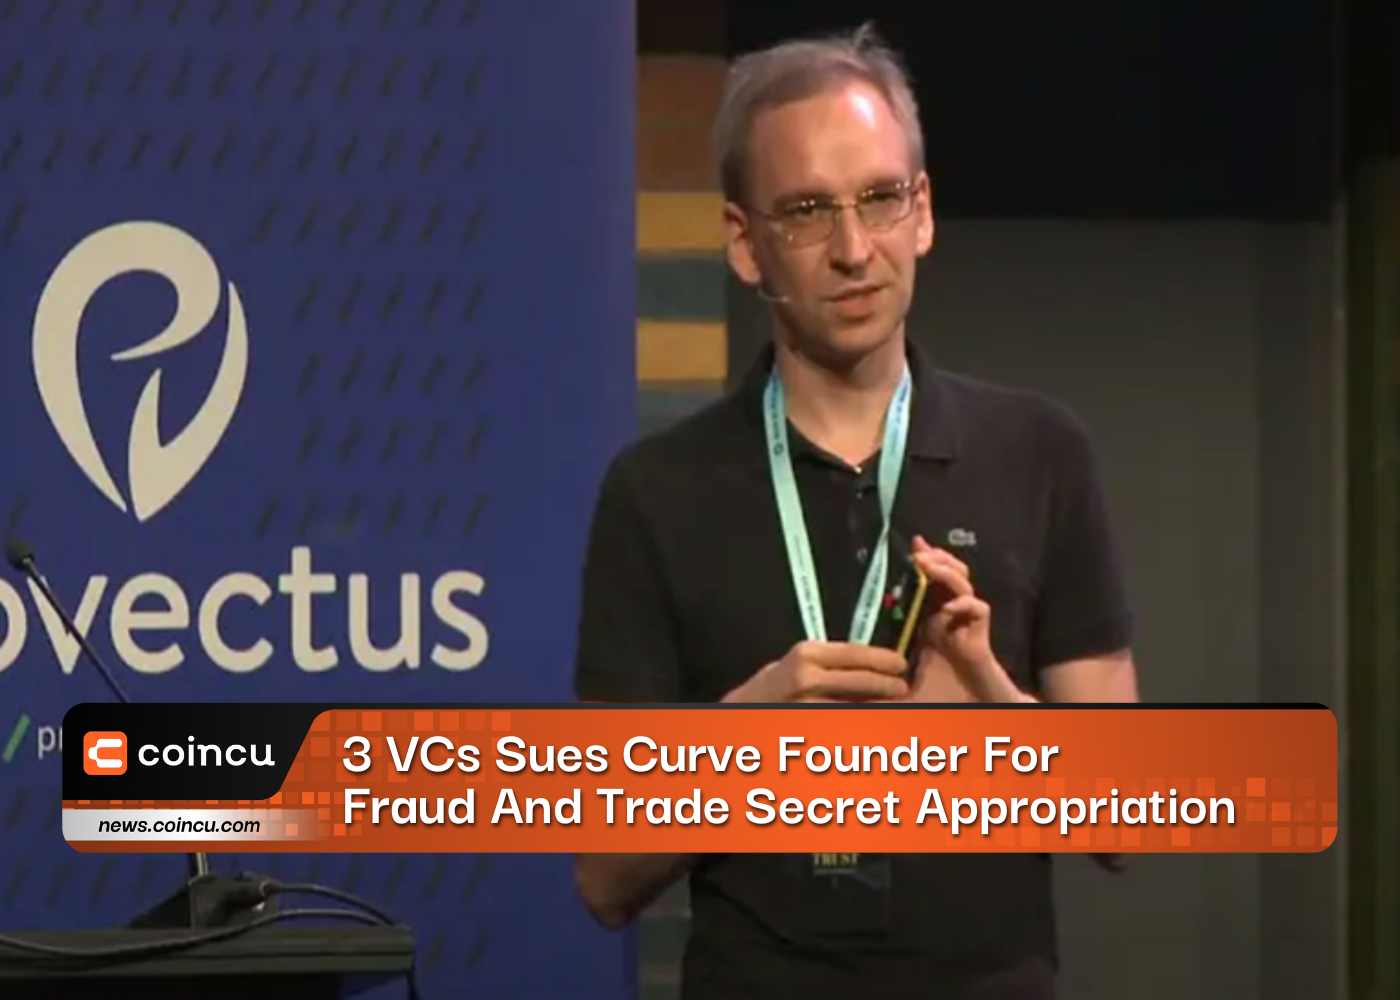 3 VCs Sues Curve Founder For Fraud And Trade Secret Appropriation